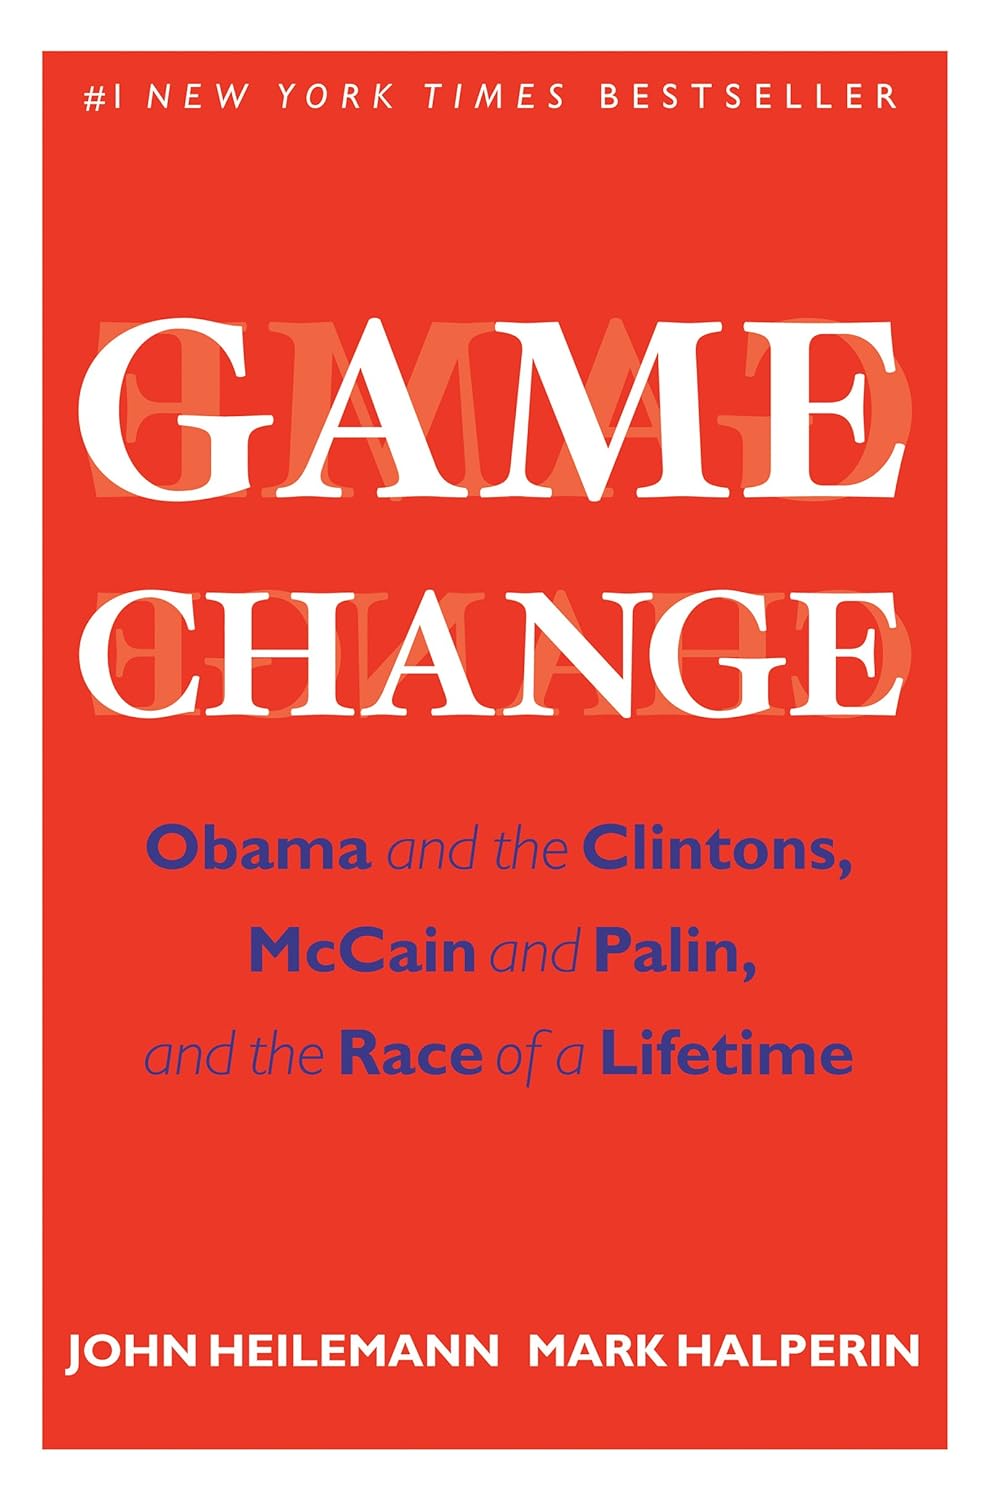 Download Game Change: Obama and the Clintons, McCain and Palin, and the Race of a Lifetime PDF by John Heilemann